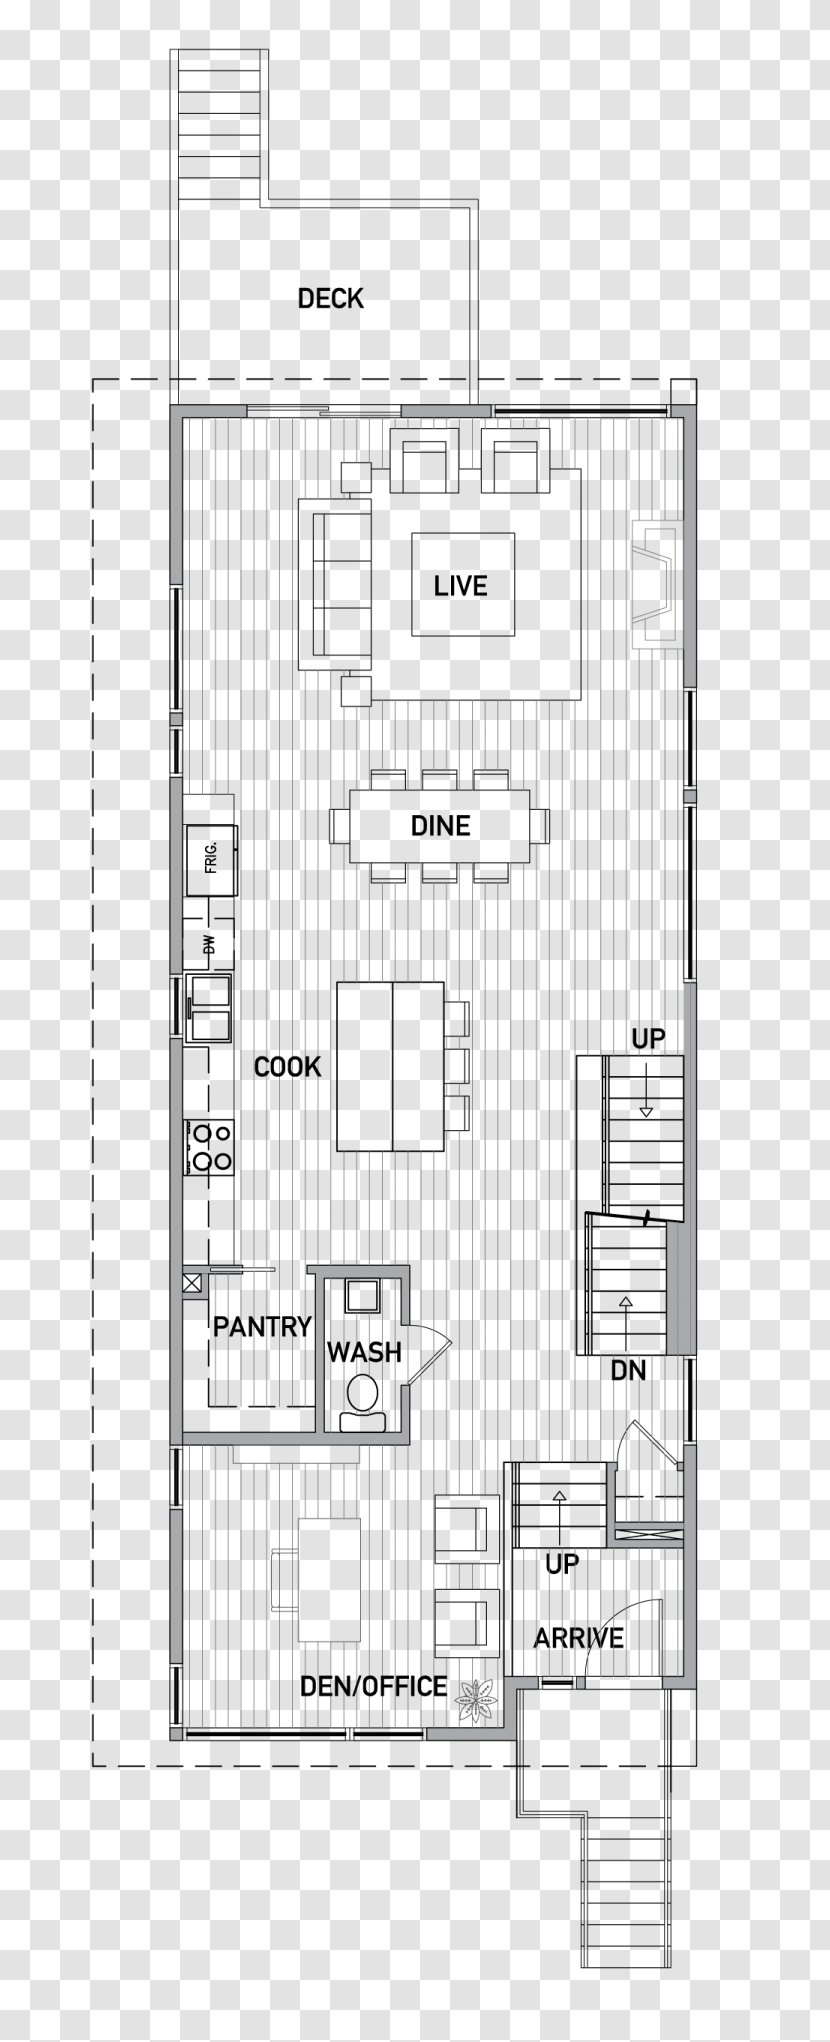 Floor Plan Architecture - Real Estate - Concession Stand Transparent PNG